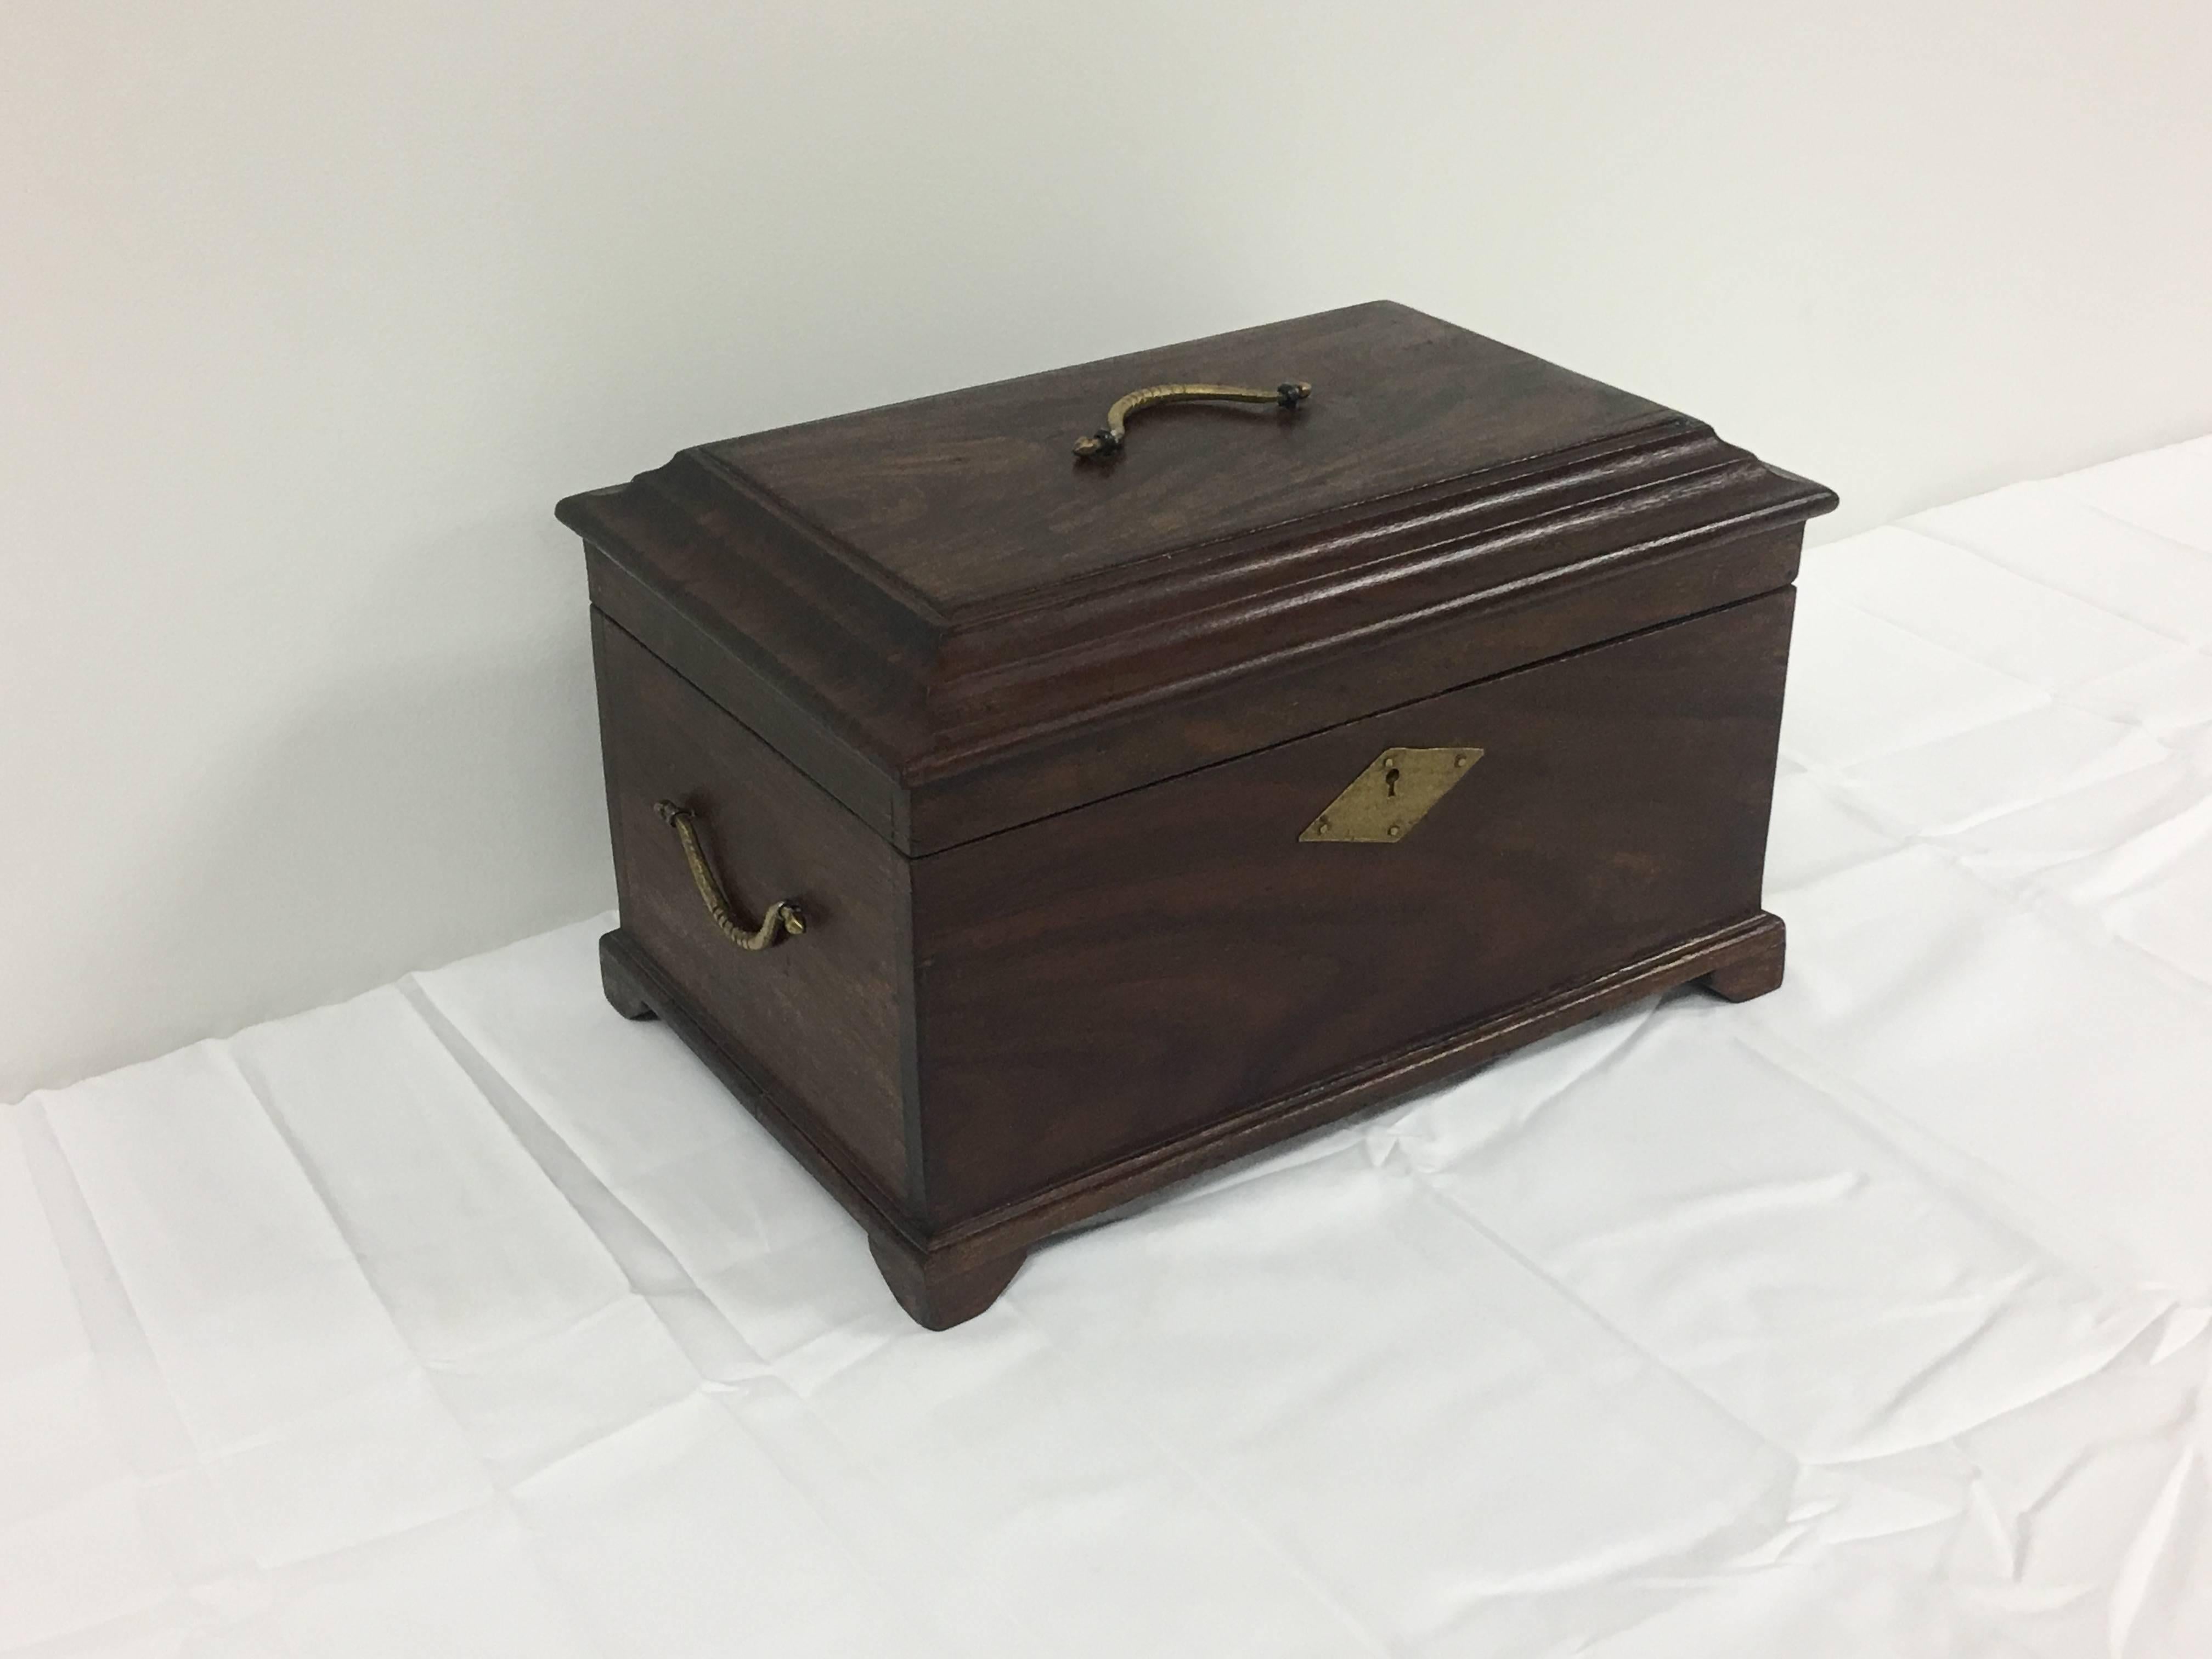 Offered is a stunning, late 19th century English mahogany tea caddy box. Gorgeous brass hardware. Includes key.